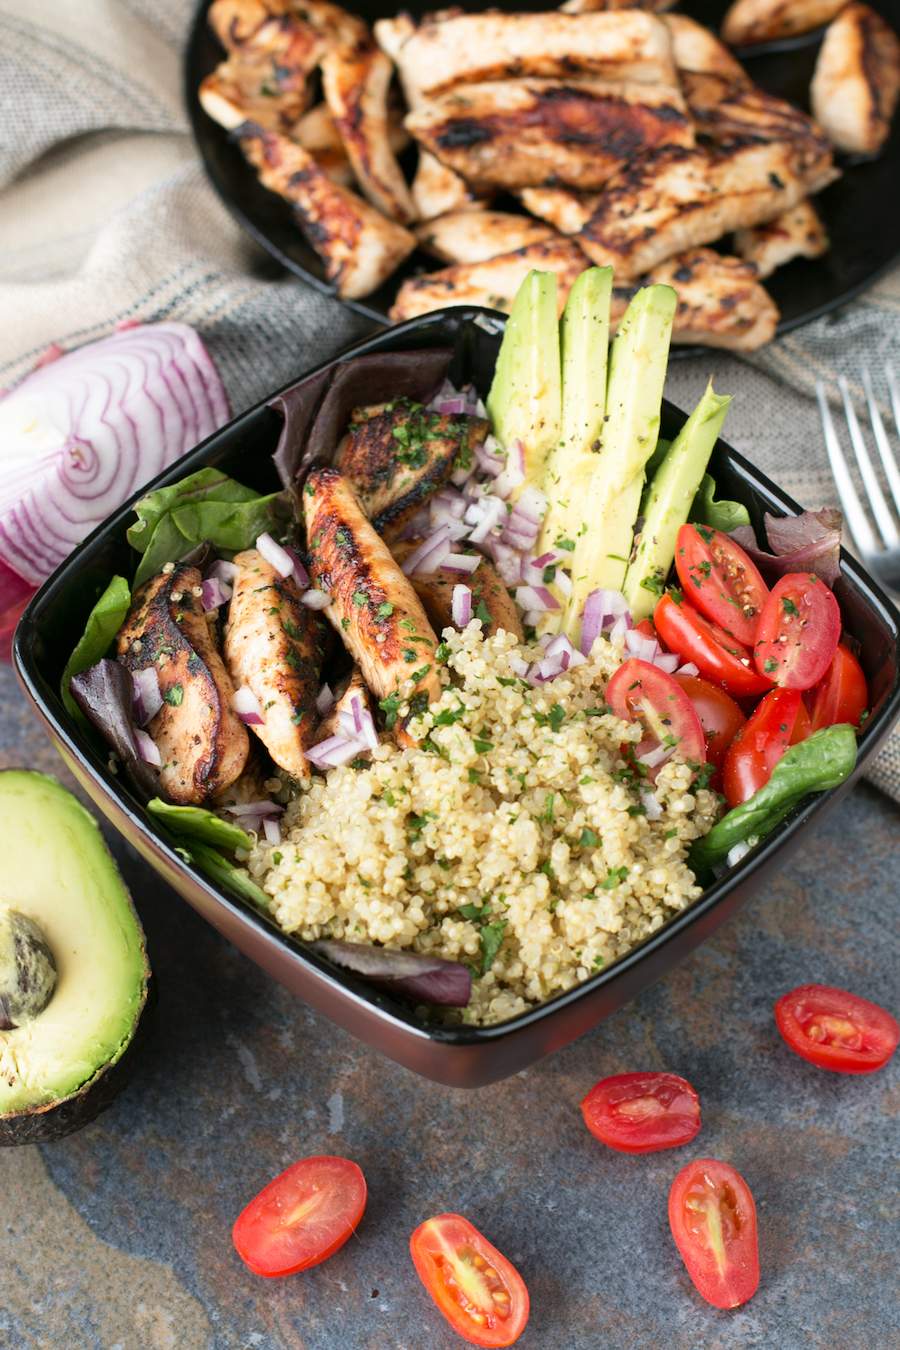 This has the grilled chicken lime bowls in a black bowl with cilantro lime quinoa, chicken, avocado, and tomato in the bowl while chicken avocado and tomato surround the bowl.